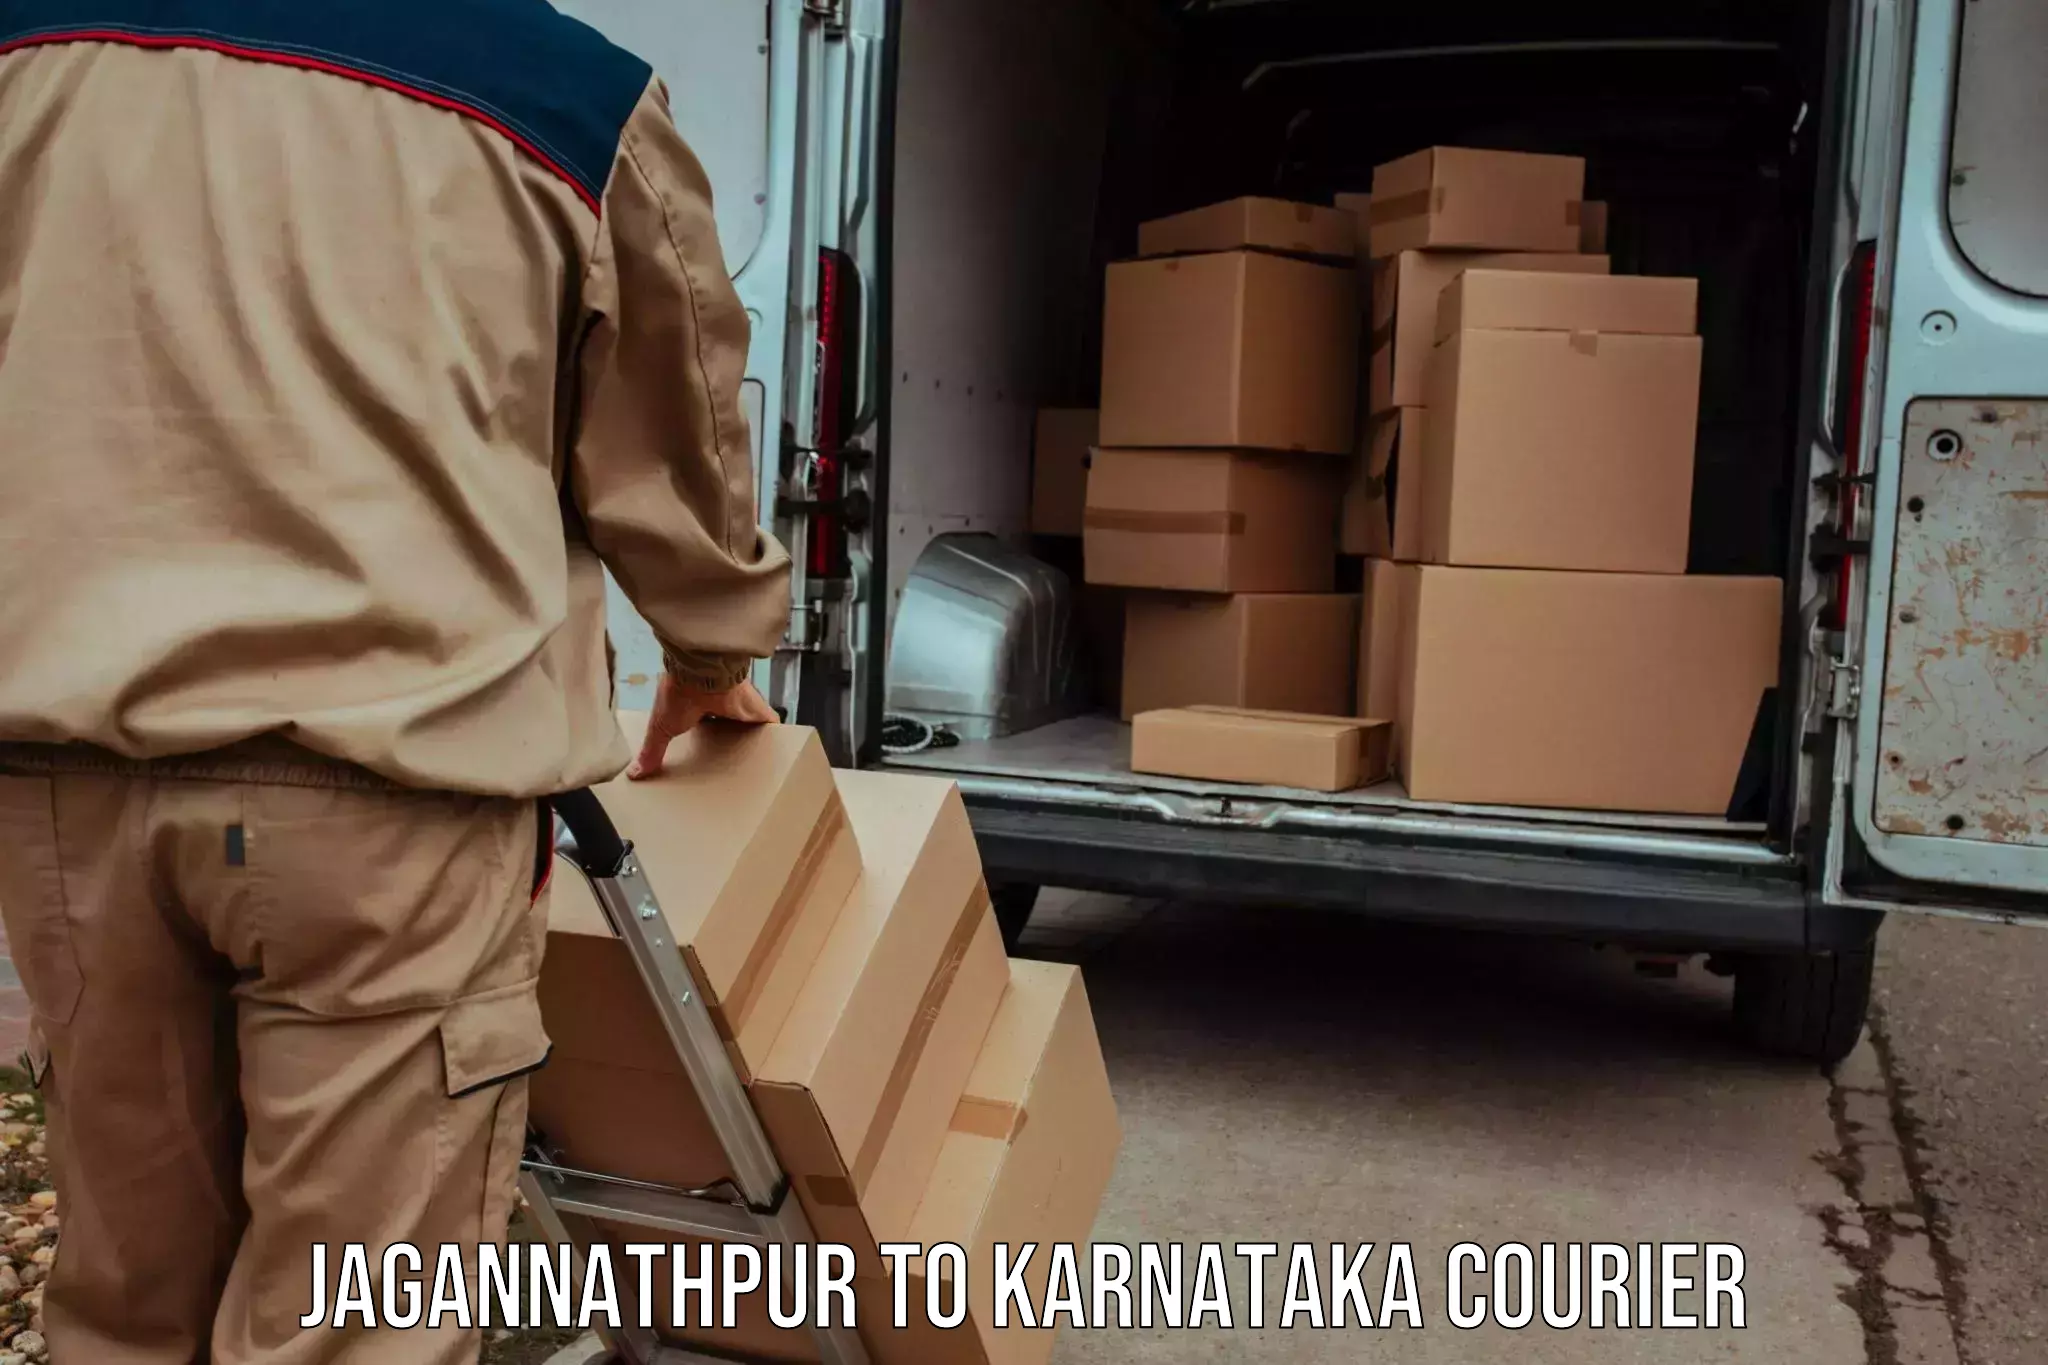 Easy access courier services Jagannathpur to Kollegal